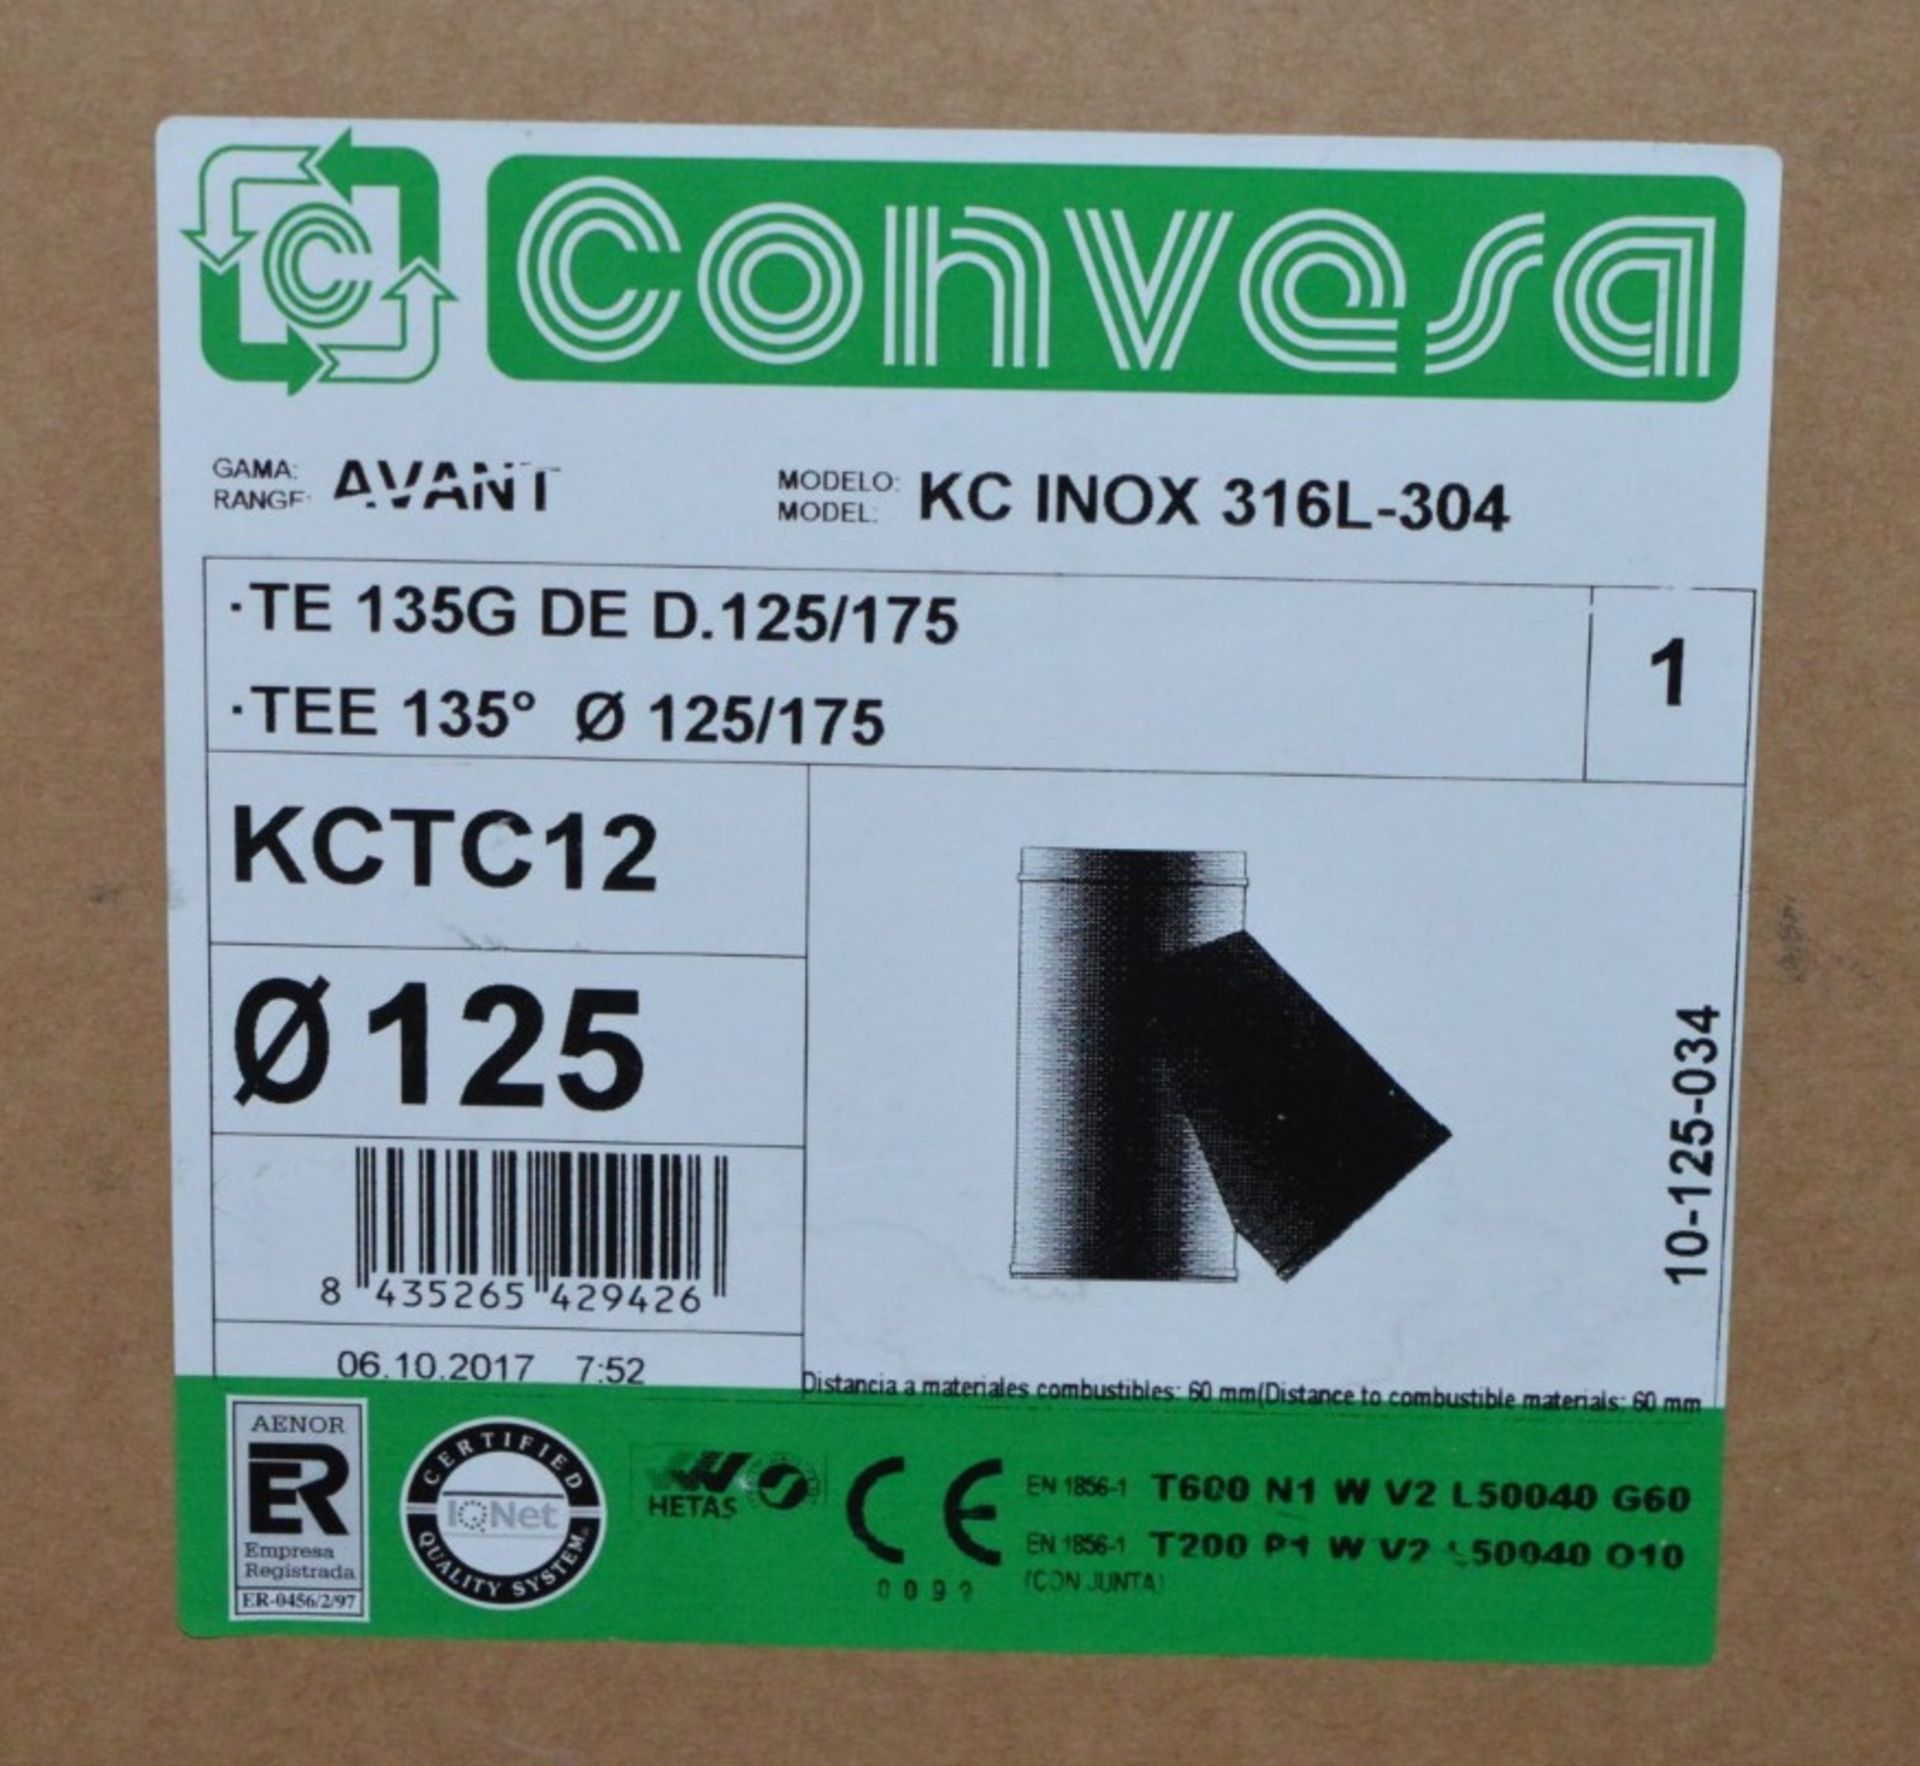 1 x Convesa 5" 135 Degree Tee Piece Twin Wall Insulated Flue Pipe Multifuel - Model KTCC12 - - Image 3 of 3